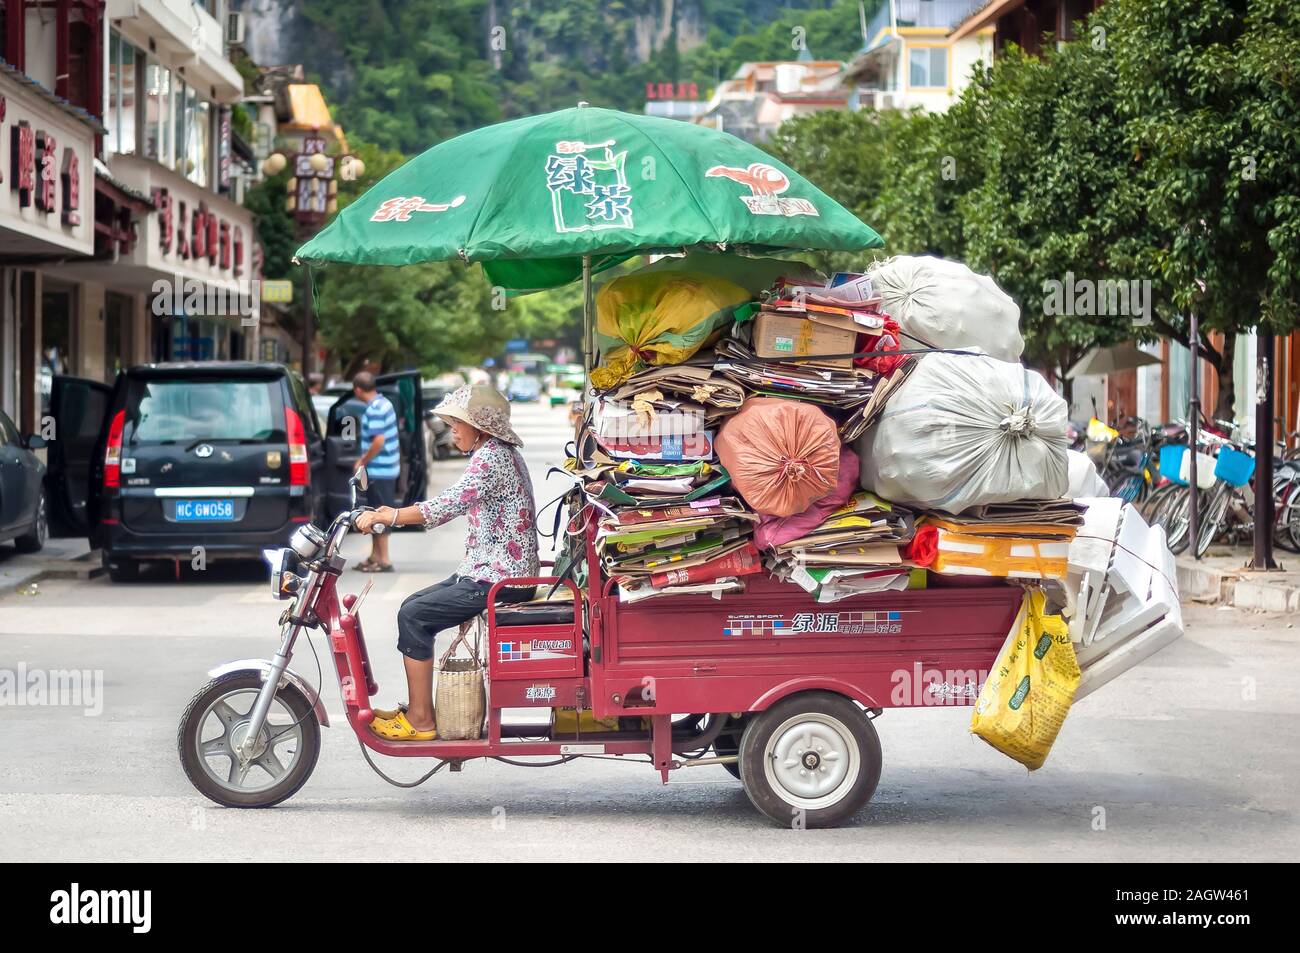 YANGSHUO, CHINA - AUG 10, 2013 - Small truck overloaded with cardboard and bags of plastic bottles in the Southwestern town of Yangshuo, China Stock Photo